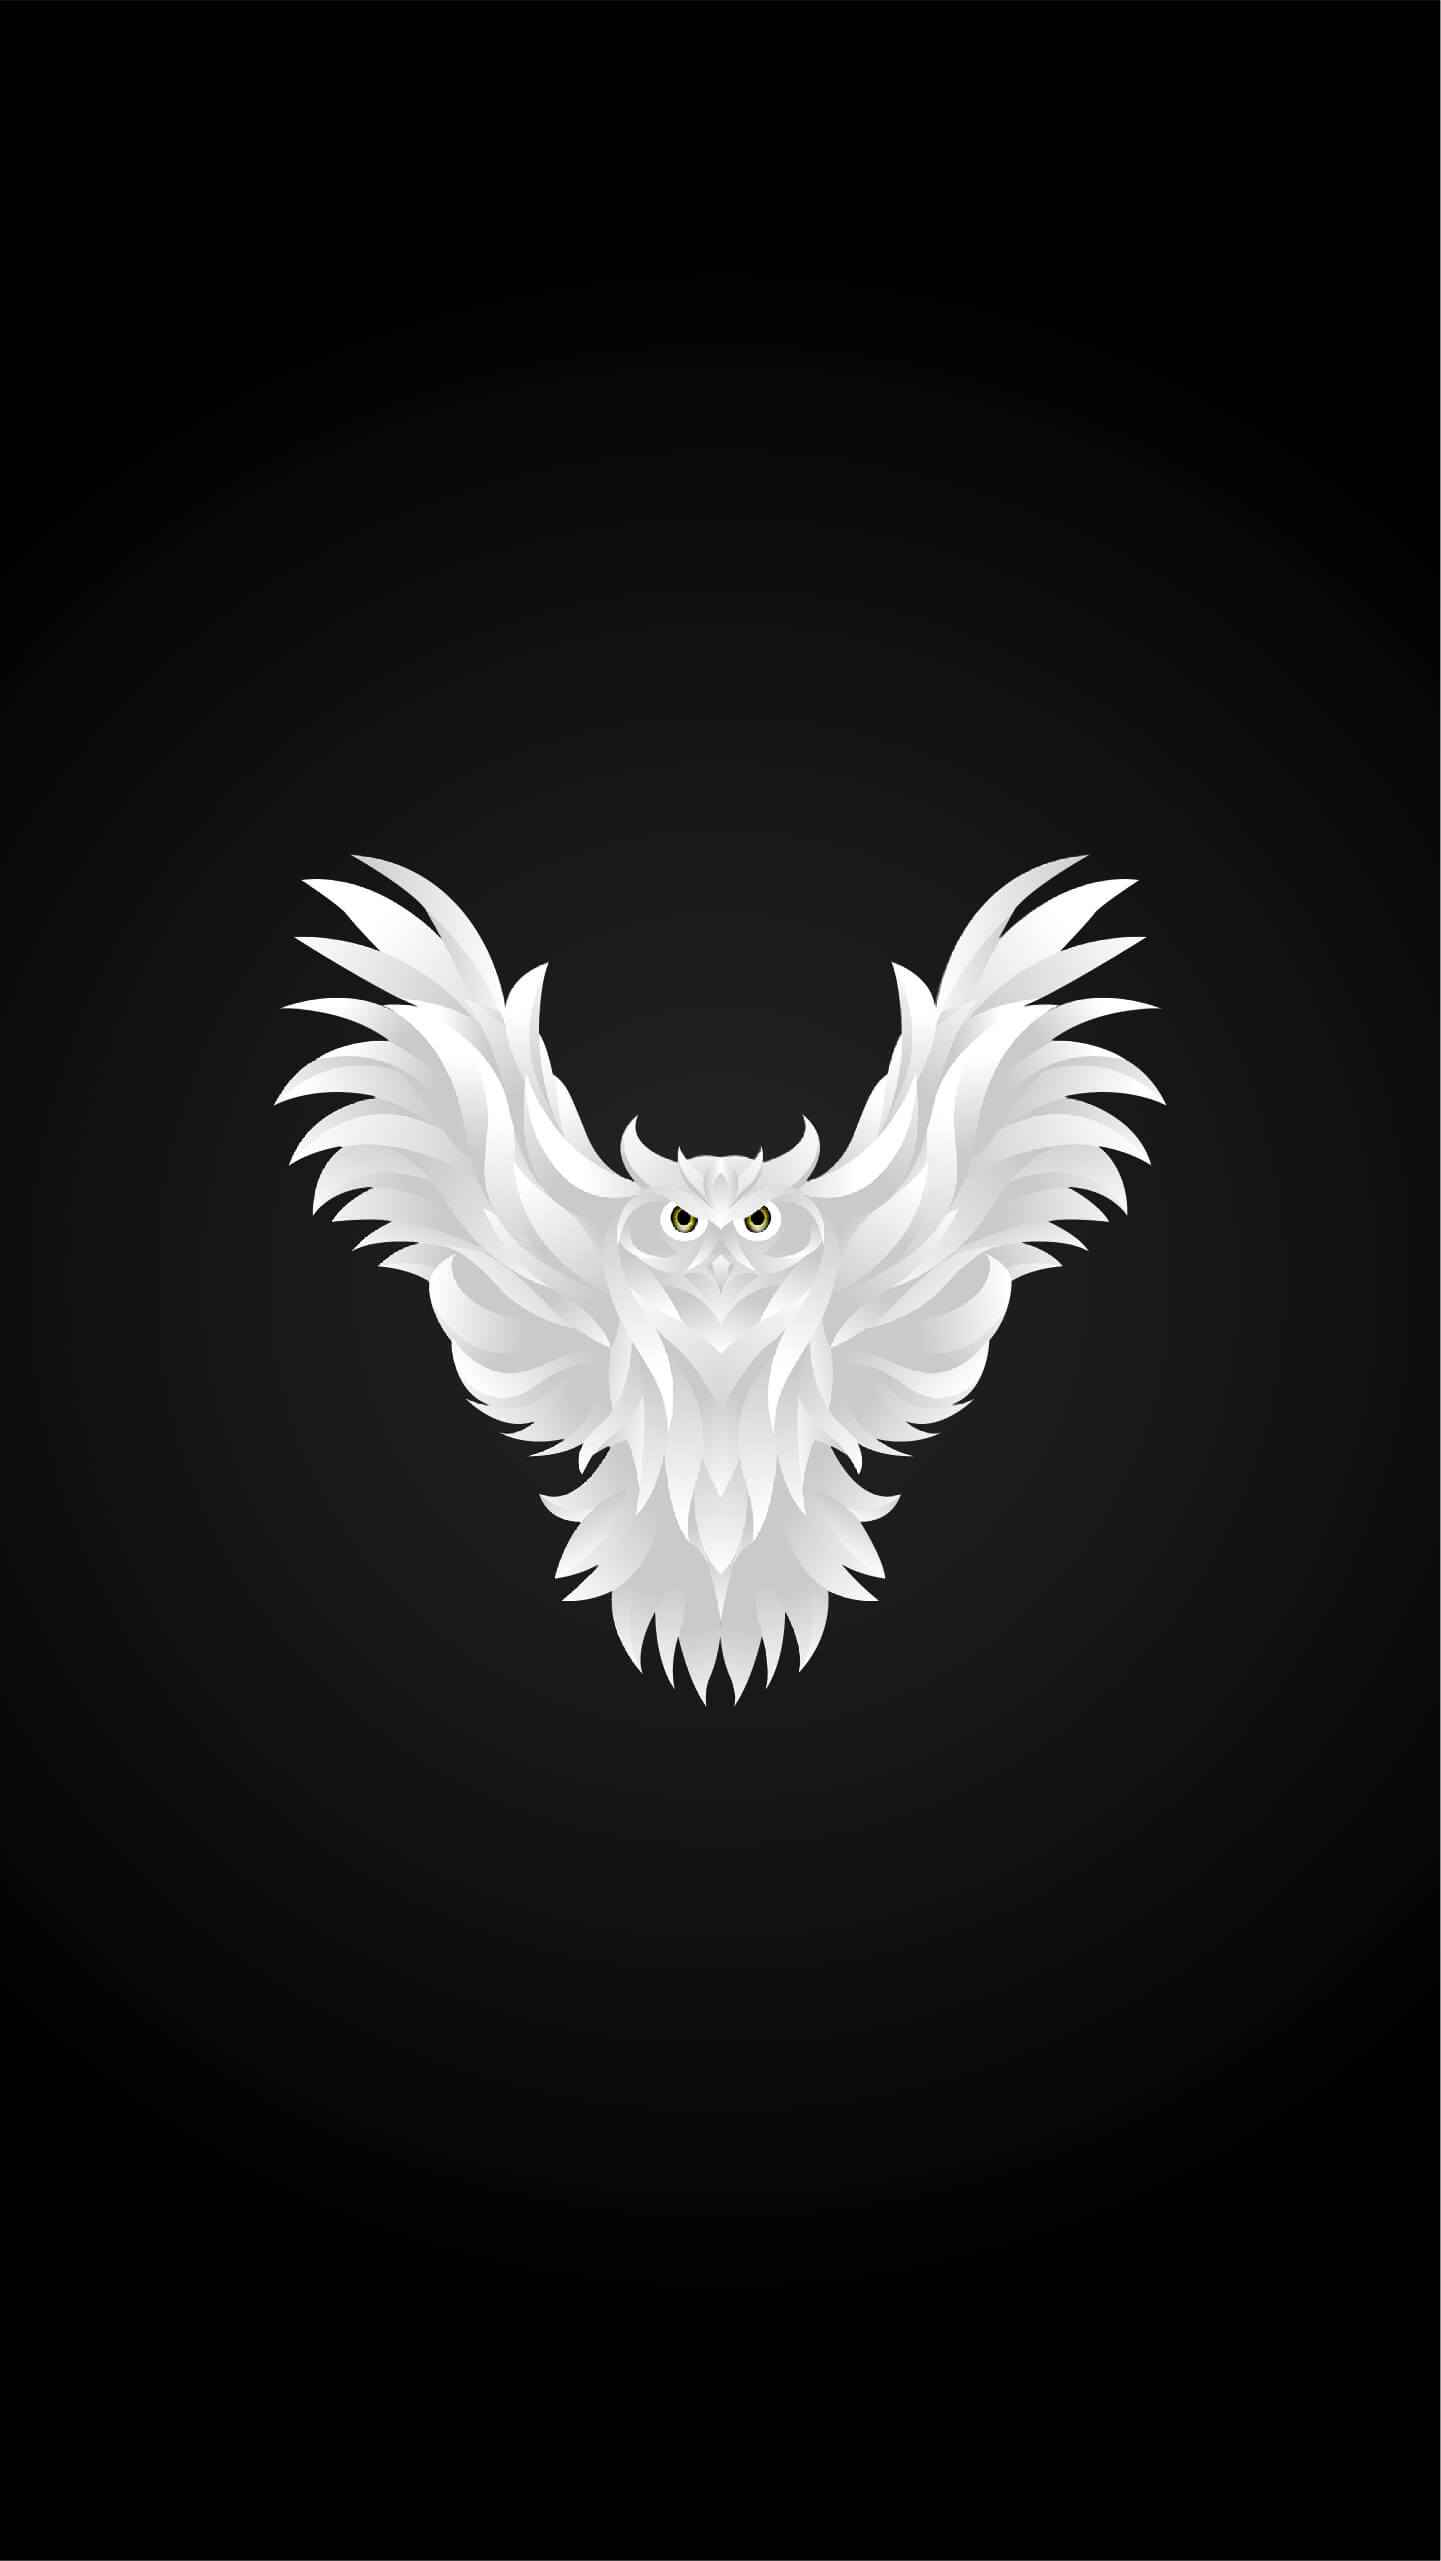 1441x2561 White Owl IPhone Wallpaper IPhone Wallpapers : iPhone Wallpapers